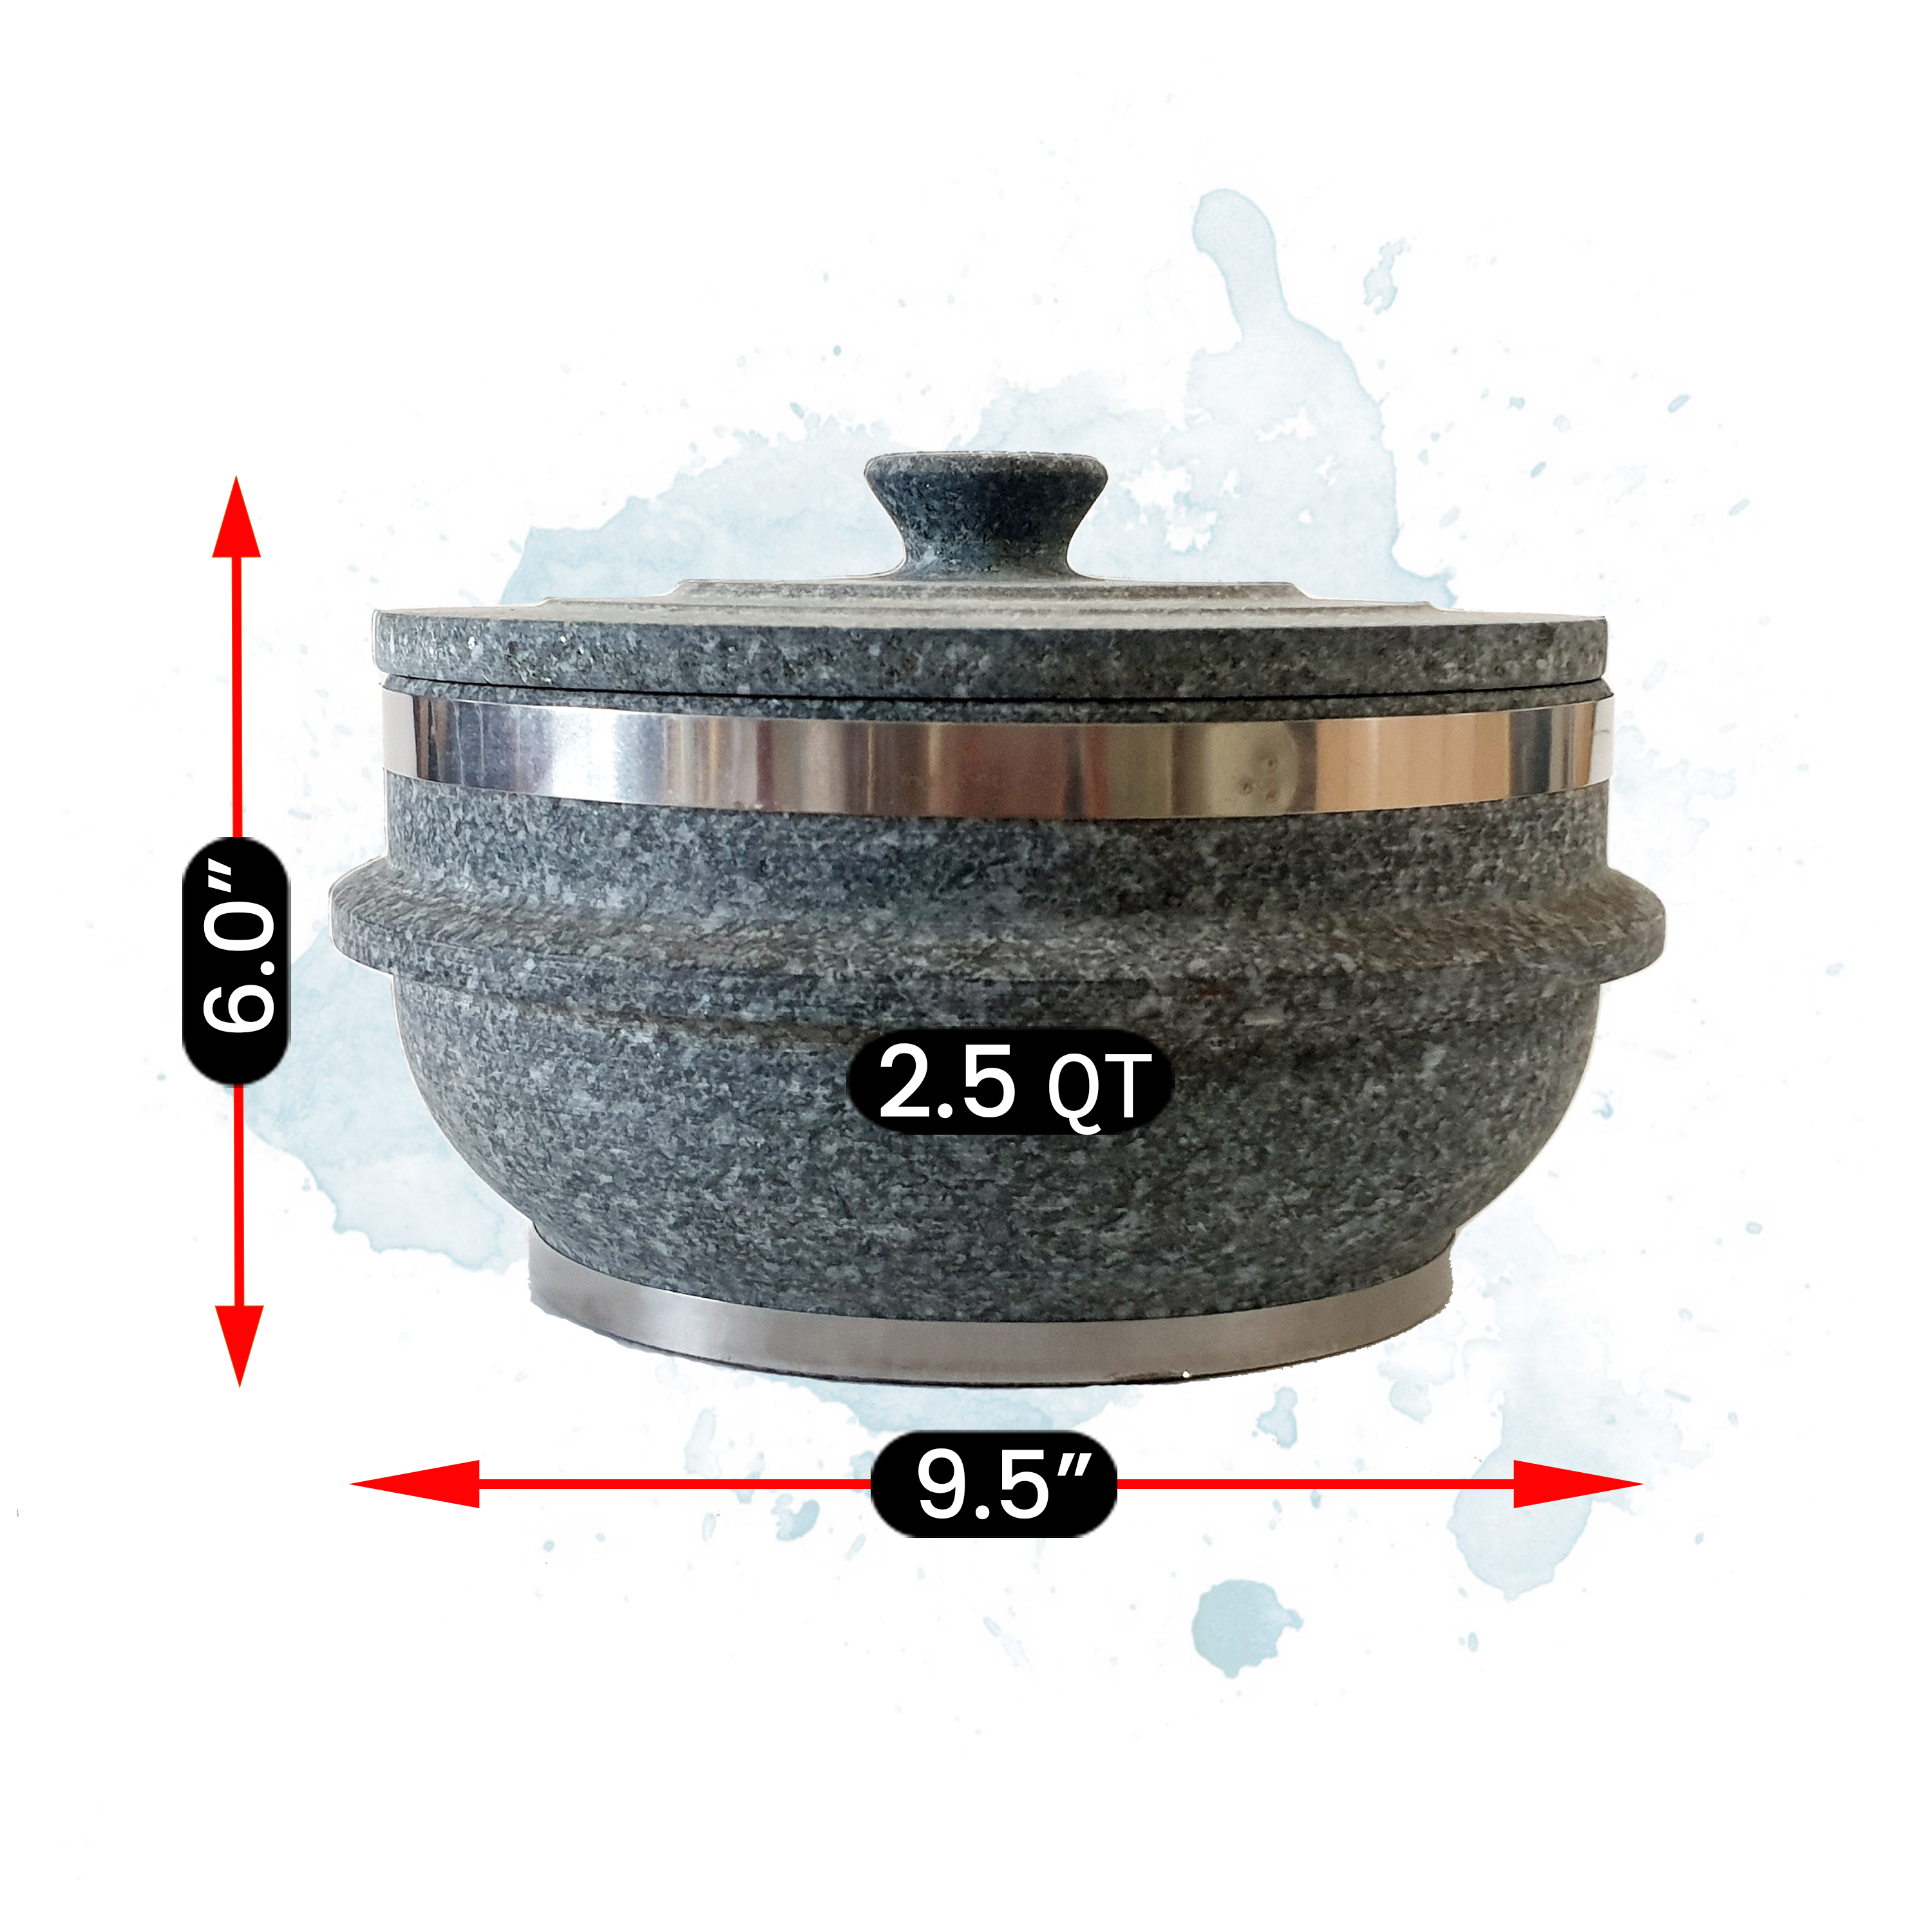 https://ancientcookware.com/images/stories/virtuemart/product/kor_1222_09_5_Large_with_measurements6.jpg